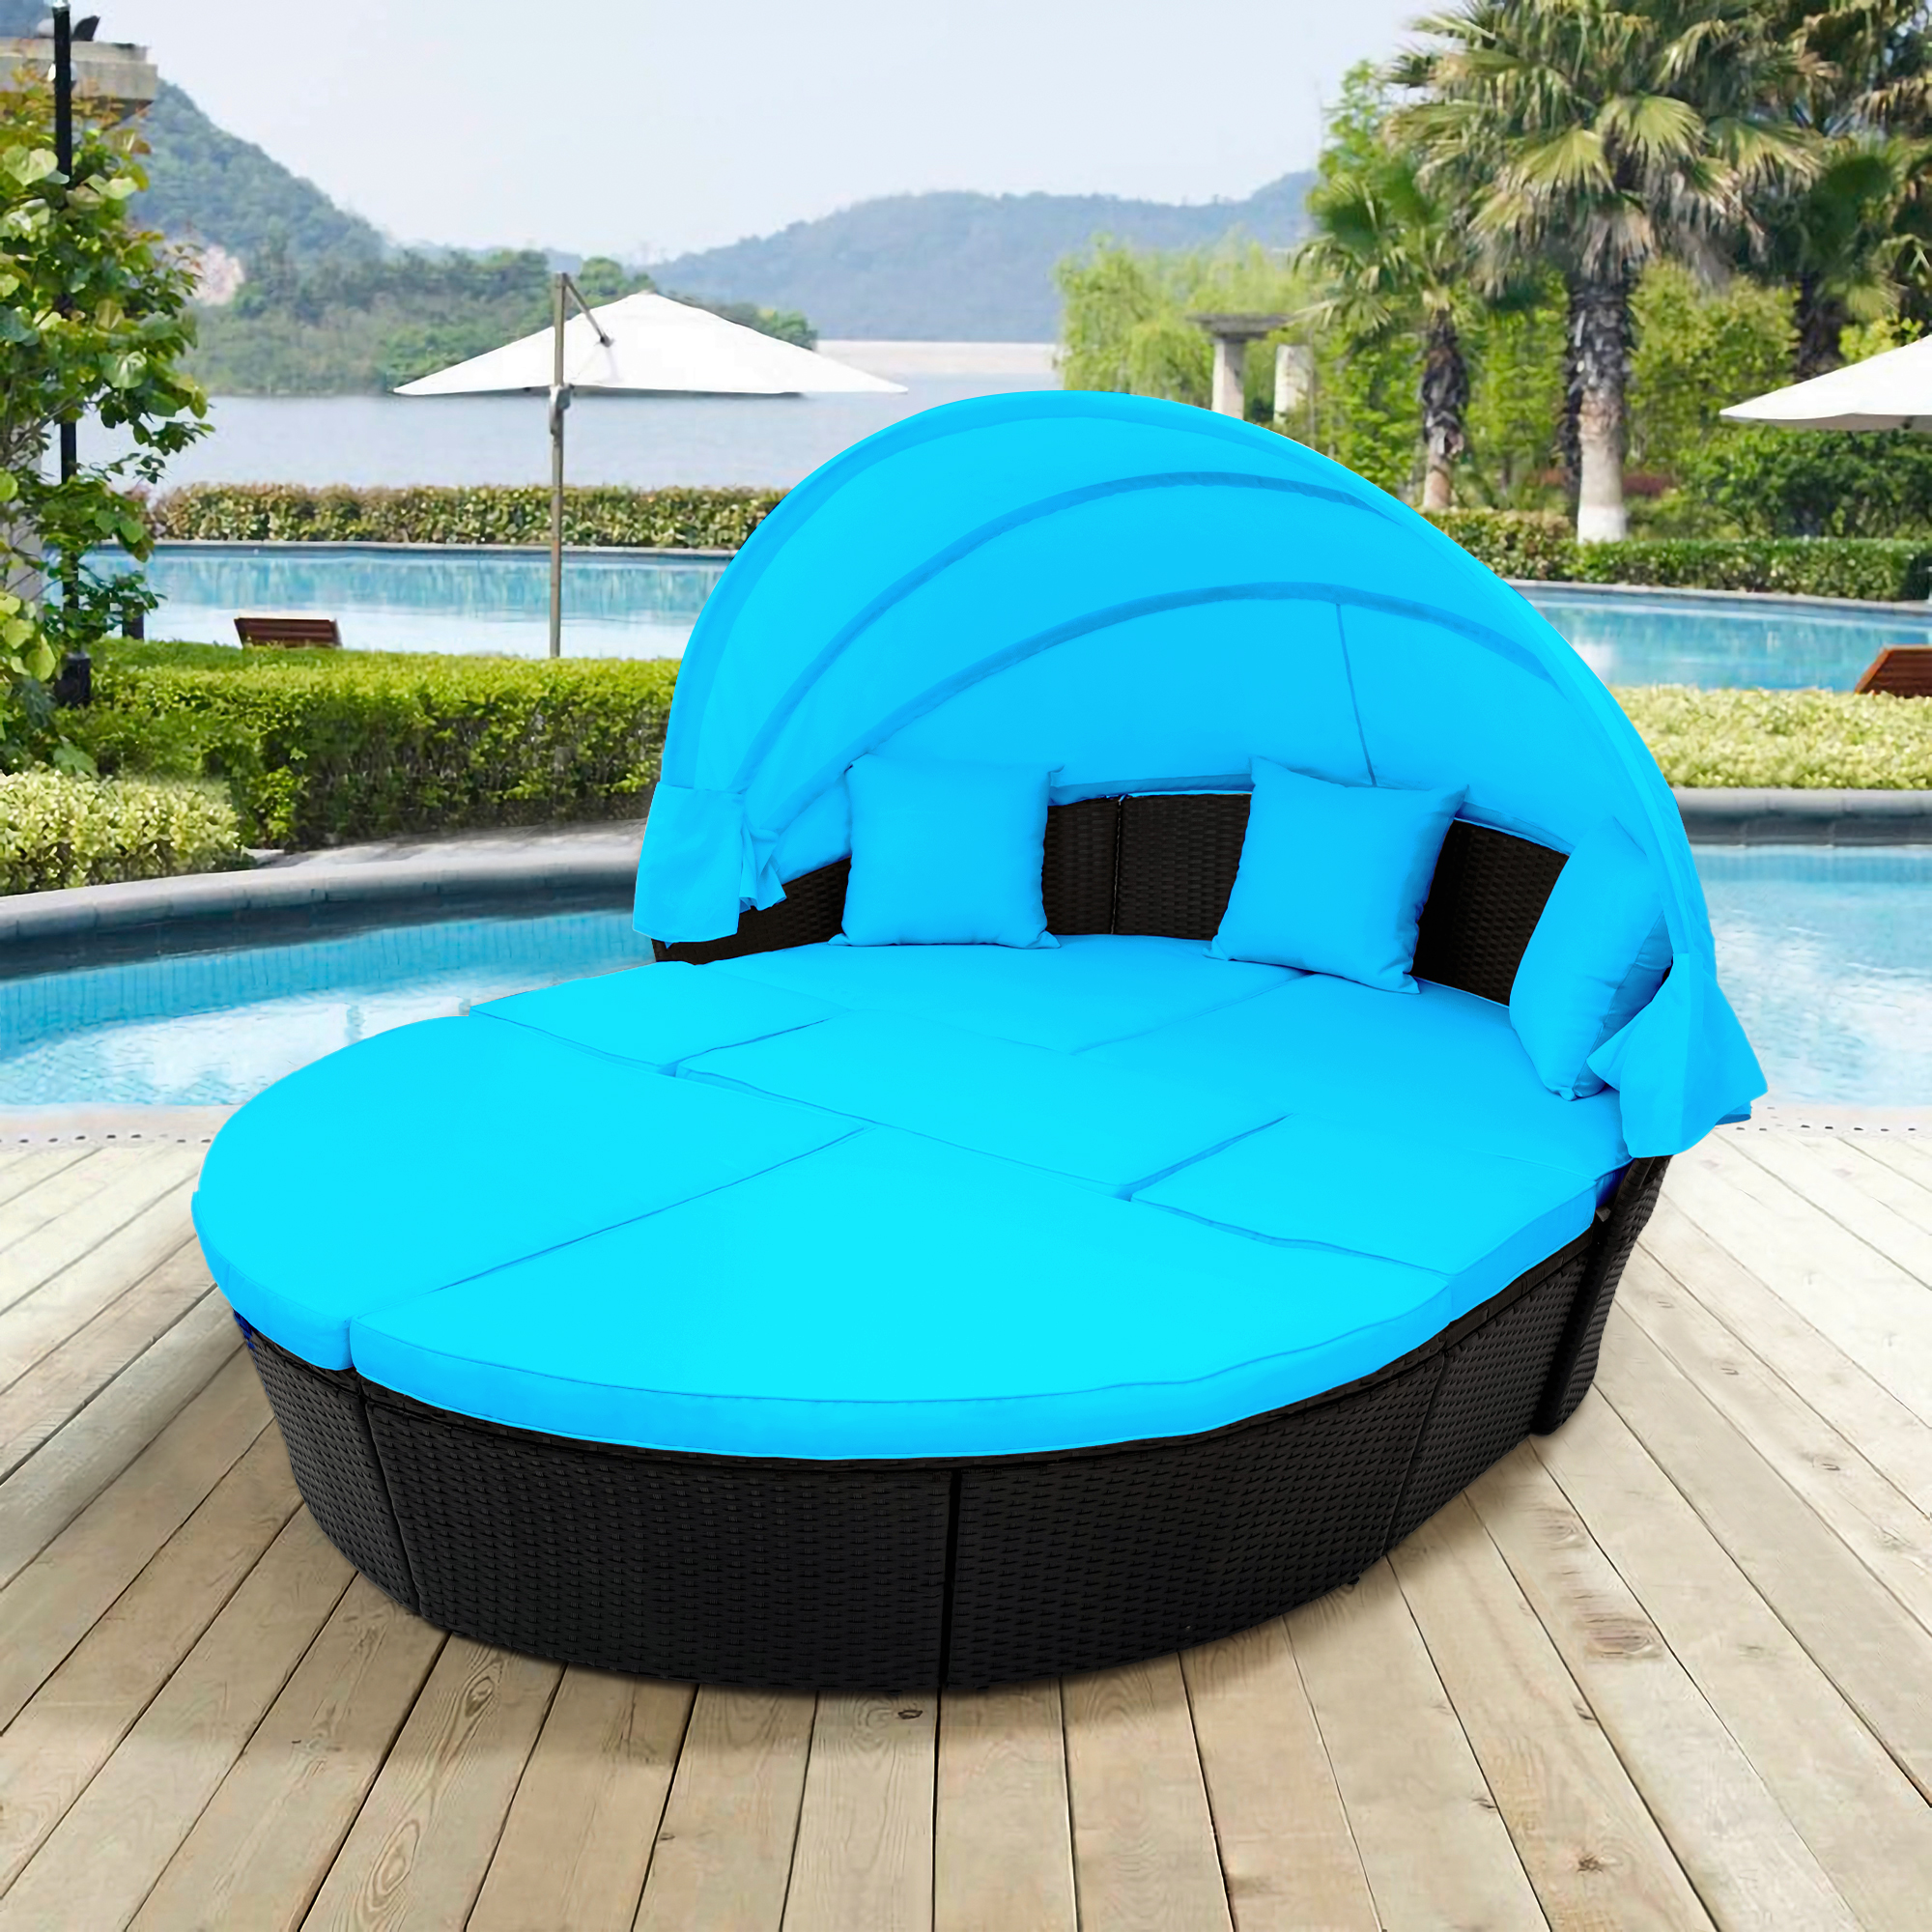 Canddidliike Outdoor Lounge Round Sofa Set w/Blue Cushions for Patio Sectional Furniture - Black Wicker - image 1 of 10